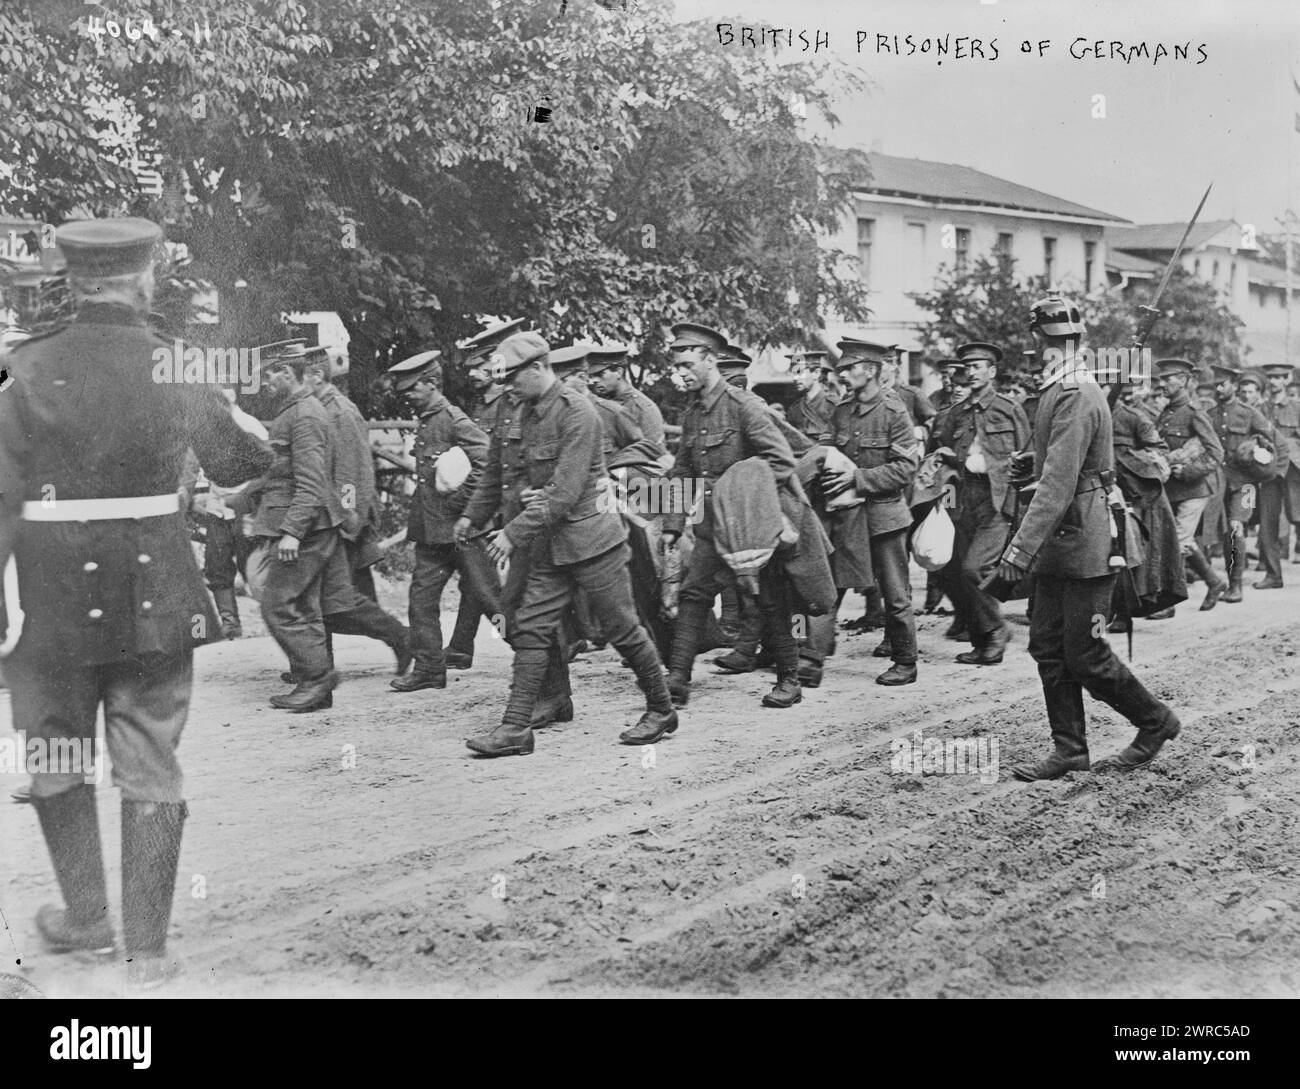 British prisoners of Germans, Photograph shows British prisoners in Germany being taken to prisoner camps after battles in the Somme during World War I., 1916, World War, 1914-1918, Glass negatives, 1 negative: glass Stock Photo